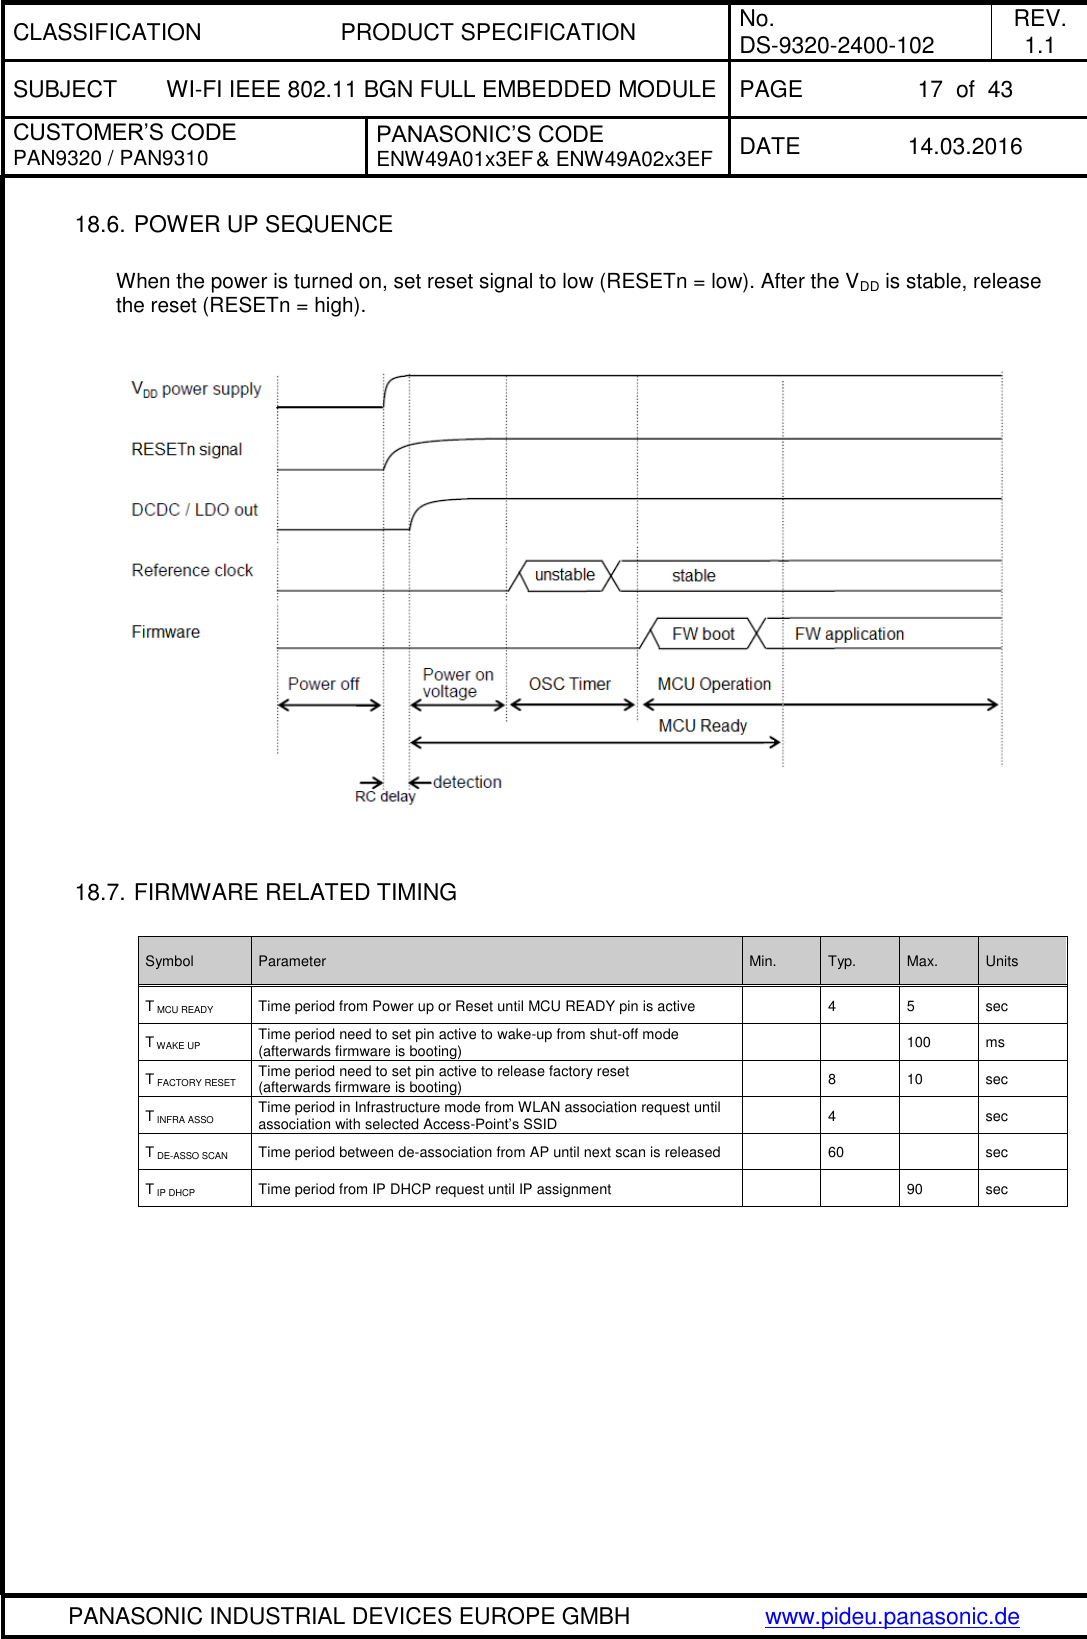 CLASSIFICATION PRODUCT SPECIFICATION No. DS-9320-2400-102 REV. 1.1 SUBJECT WI-FI IEEE 802.11 BGN FULL EMBEDDED MODULE PAGE 17  of  43 CUSTOMER’S CODE PAN9320 / PAN9310 PANASONIC’S CODE ENW49A01x3EF &amp; ENW49A02x3EF DATE 14.03.2016   PANASONIC INDUSTRIAL DEVICES EUROPE GMBH www.pideu.panasonic.de  18.6. POWER UP SEQUENCE  When the power is turned on, set reset signal to low (RESETn = low). After the VDD is stable, release the reset (RESETn = high).     18.7. FIRMWARE RELATED TIMING  Symbol Parameter Min. Typ. Max. Units T MCU READY Time period from Power up or Reset until MCU READY pin is active  4 5 sec T WAKE UP Time period need to set pin active to wake-up from shut-off mode (afterwards firmware is booting)   100 ms T FACTORY RESET Time period need to set pin active to release factory reset            (afterwards firmware is booting)  8 10 sec T INFRA ASSO Time period in Infrastructure mode from WLAN association request until  association with selected Access-Point’s SSID  4  sec T DE-ASSO SCAN Time period between de-association from AP until next scan is released  60  sec T IP DHCP Time period from IP DHCP request until IP assignment   90 sec           